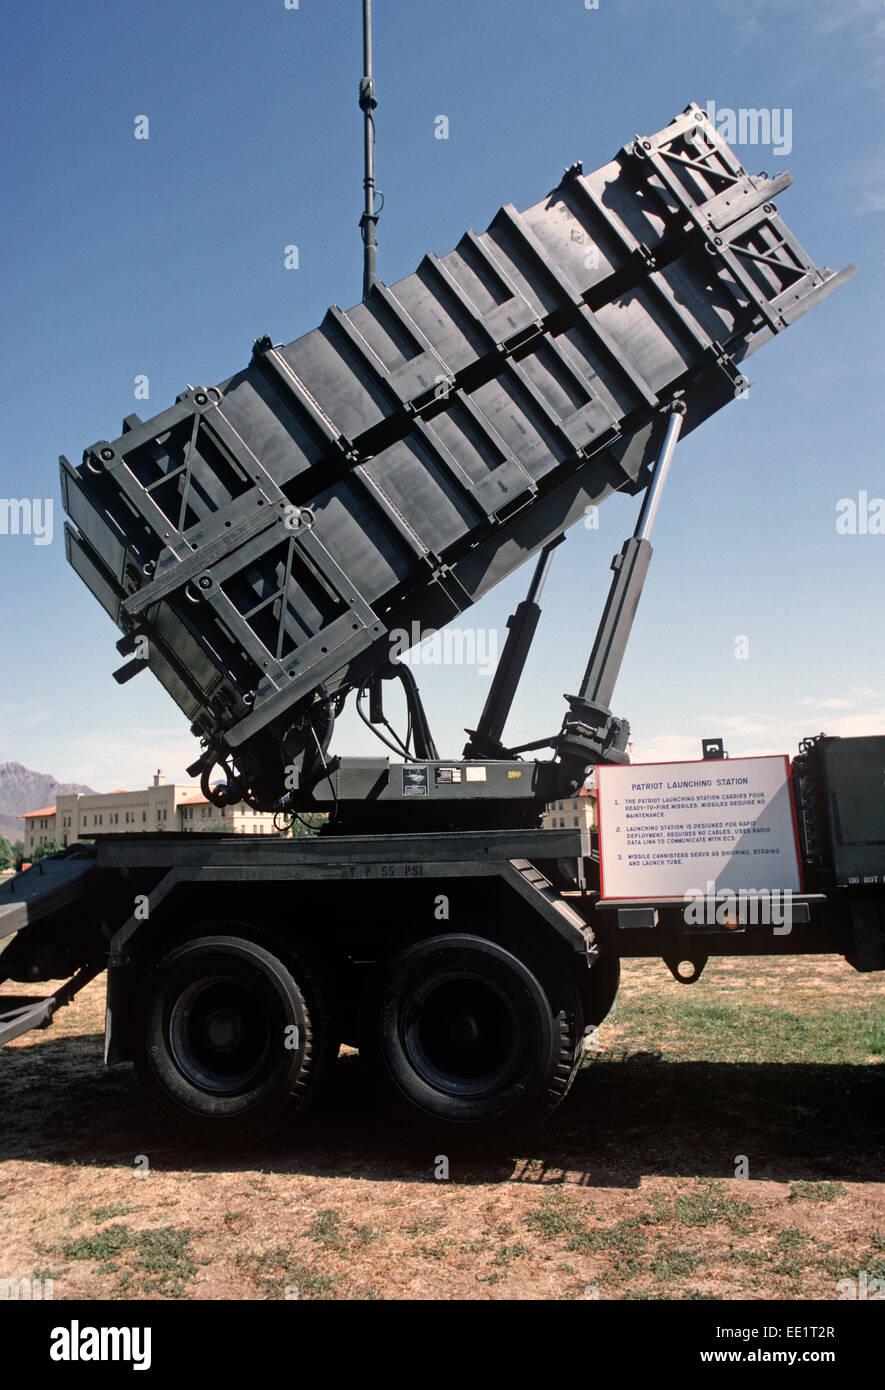 PATRIOT SURFACE-TO-AIR MISSILE SYSTEM LAUNCHER, FORT BLISS, TEXAS, UNITED STATES ARMY, USA Stock Photo